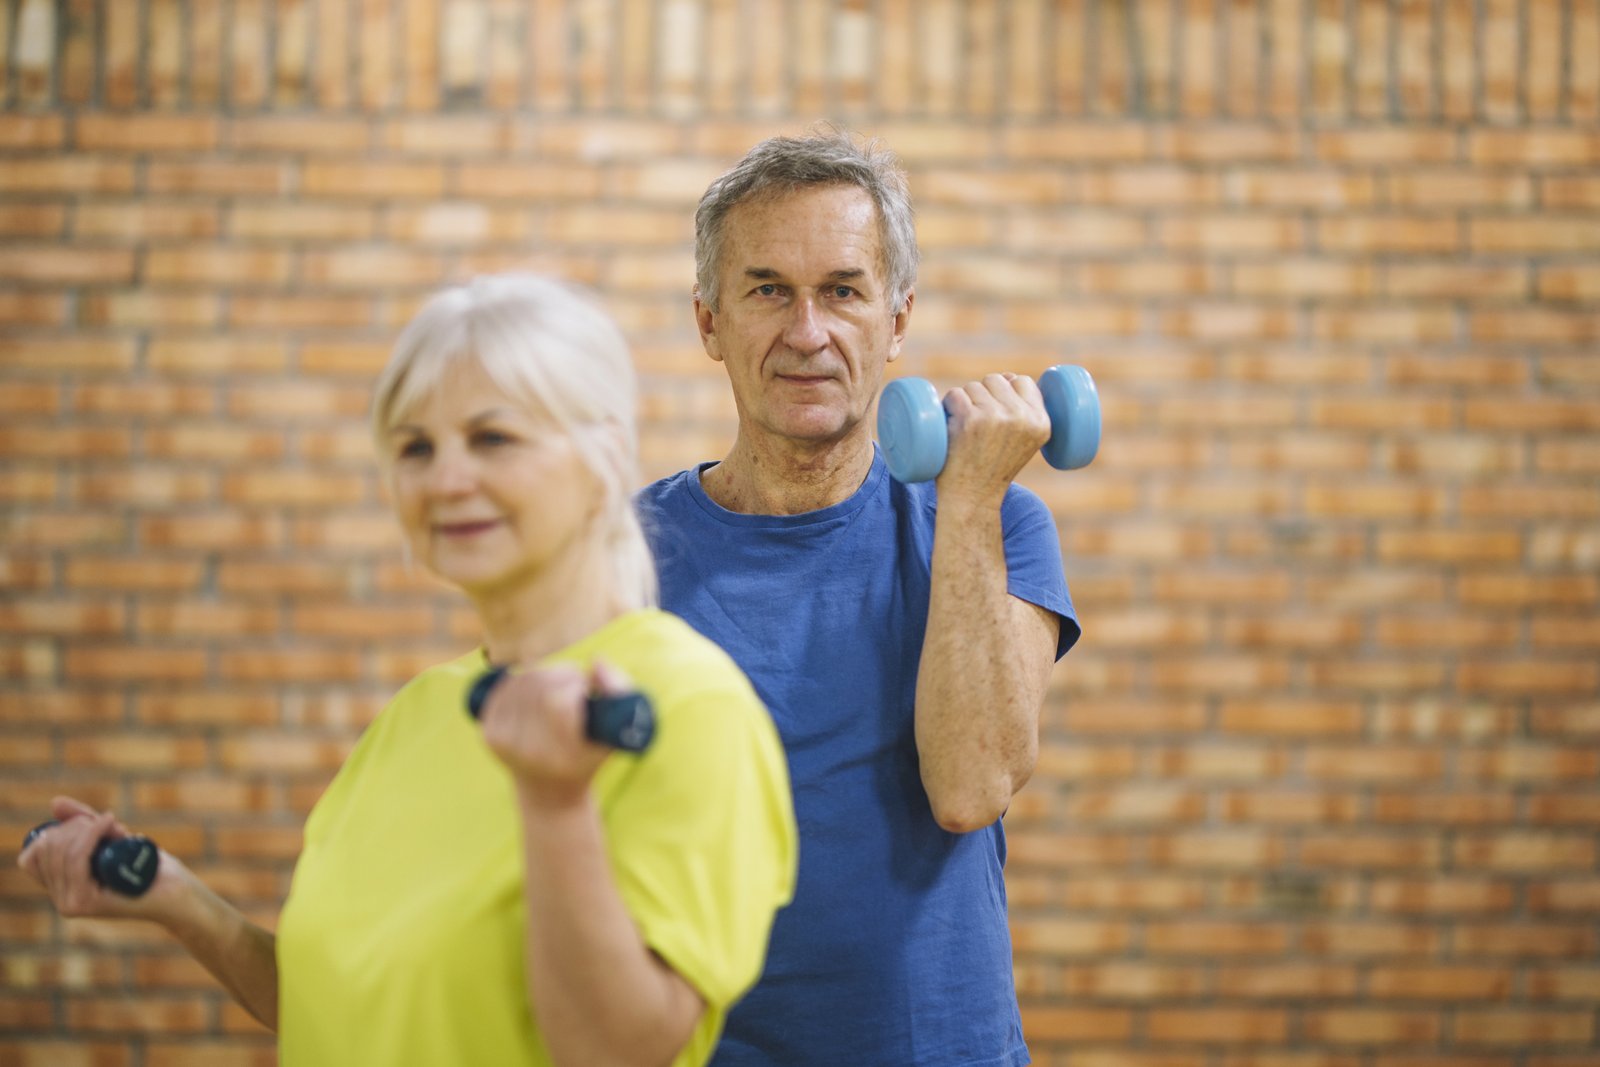 Just 1 Year Of This Exercise Could Preserve Leg Strength In Retirees, Study Reveals